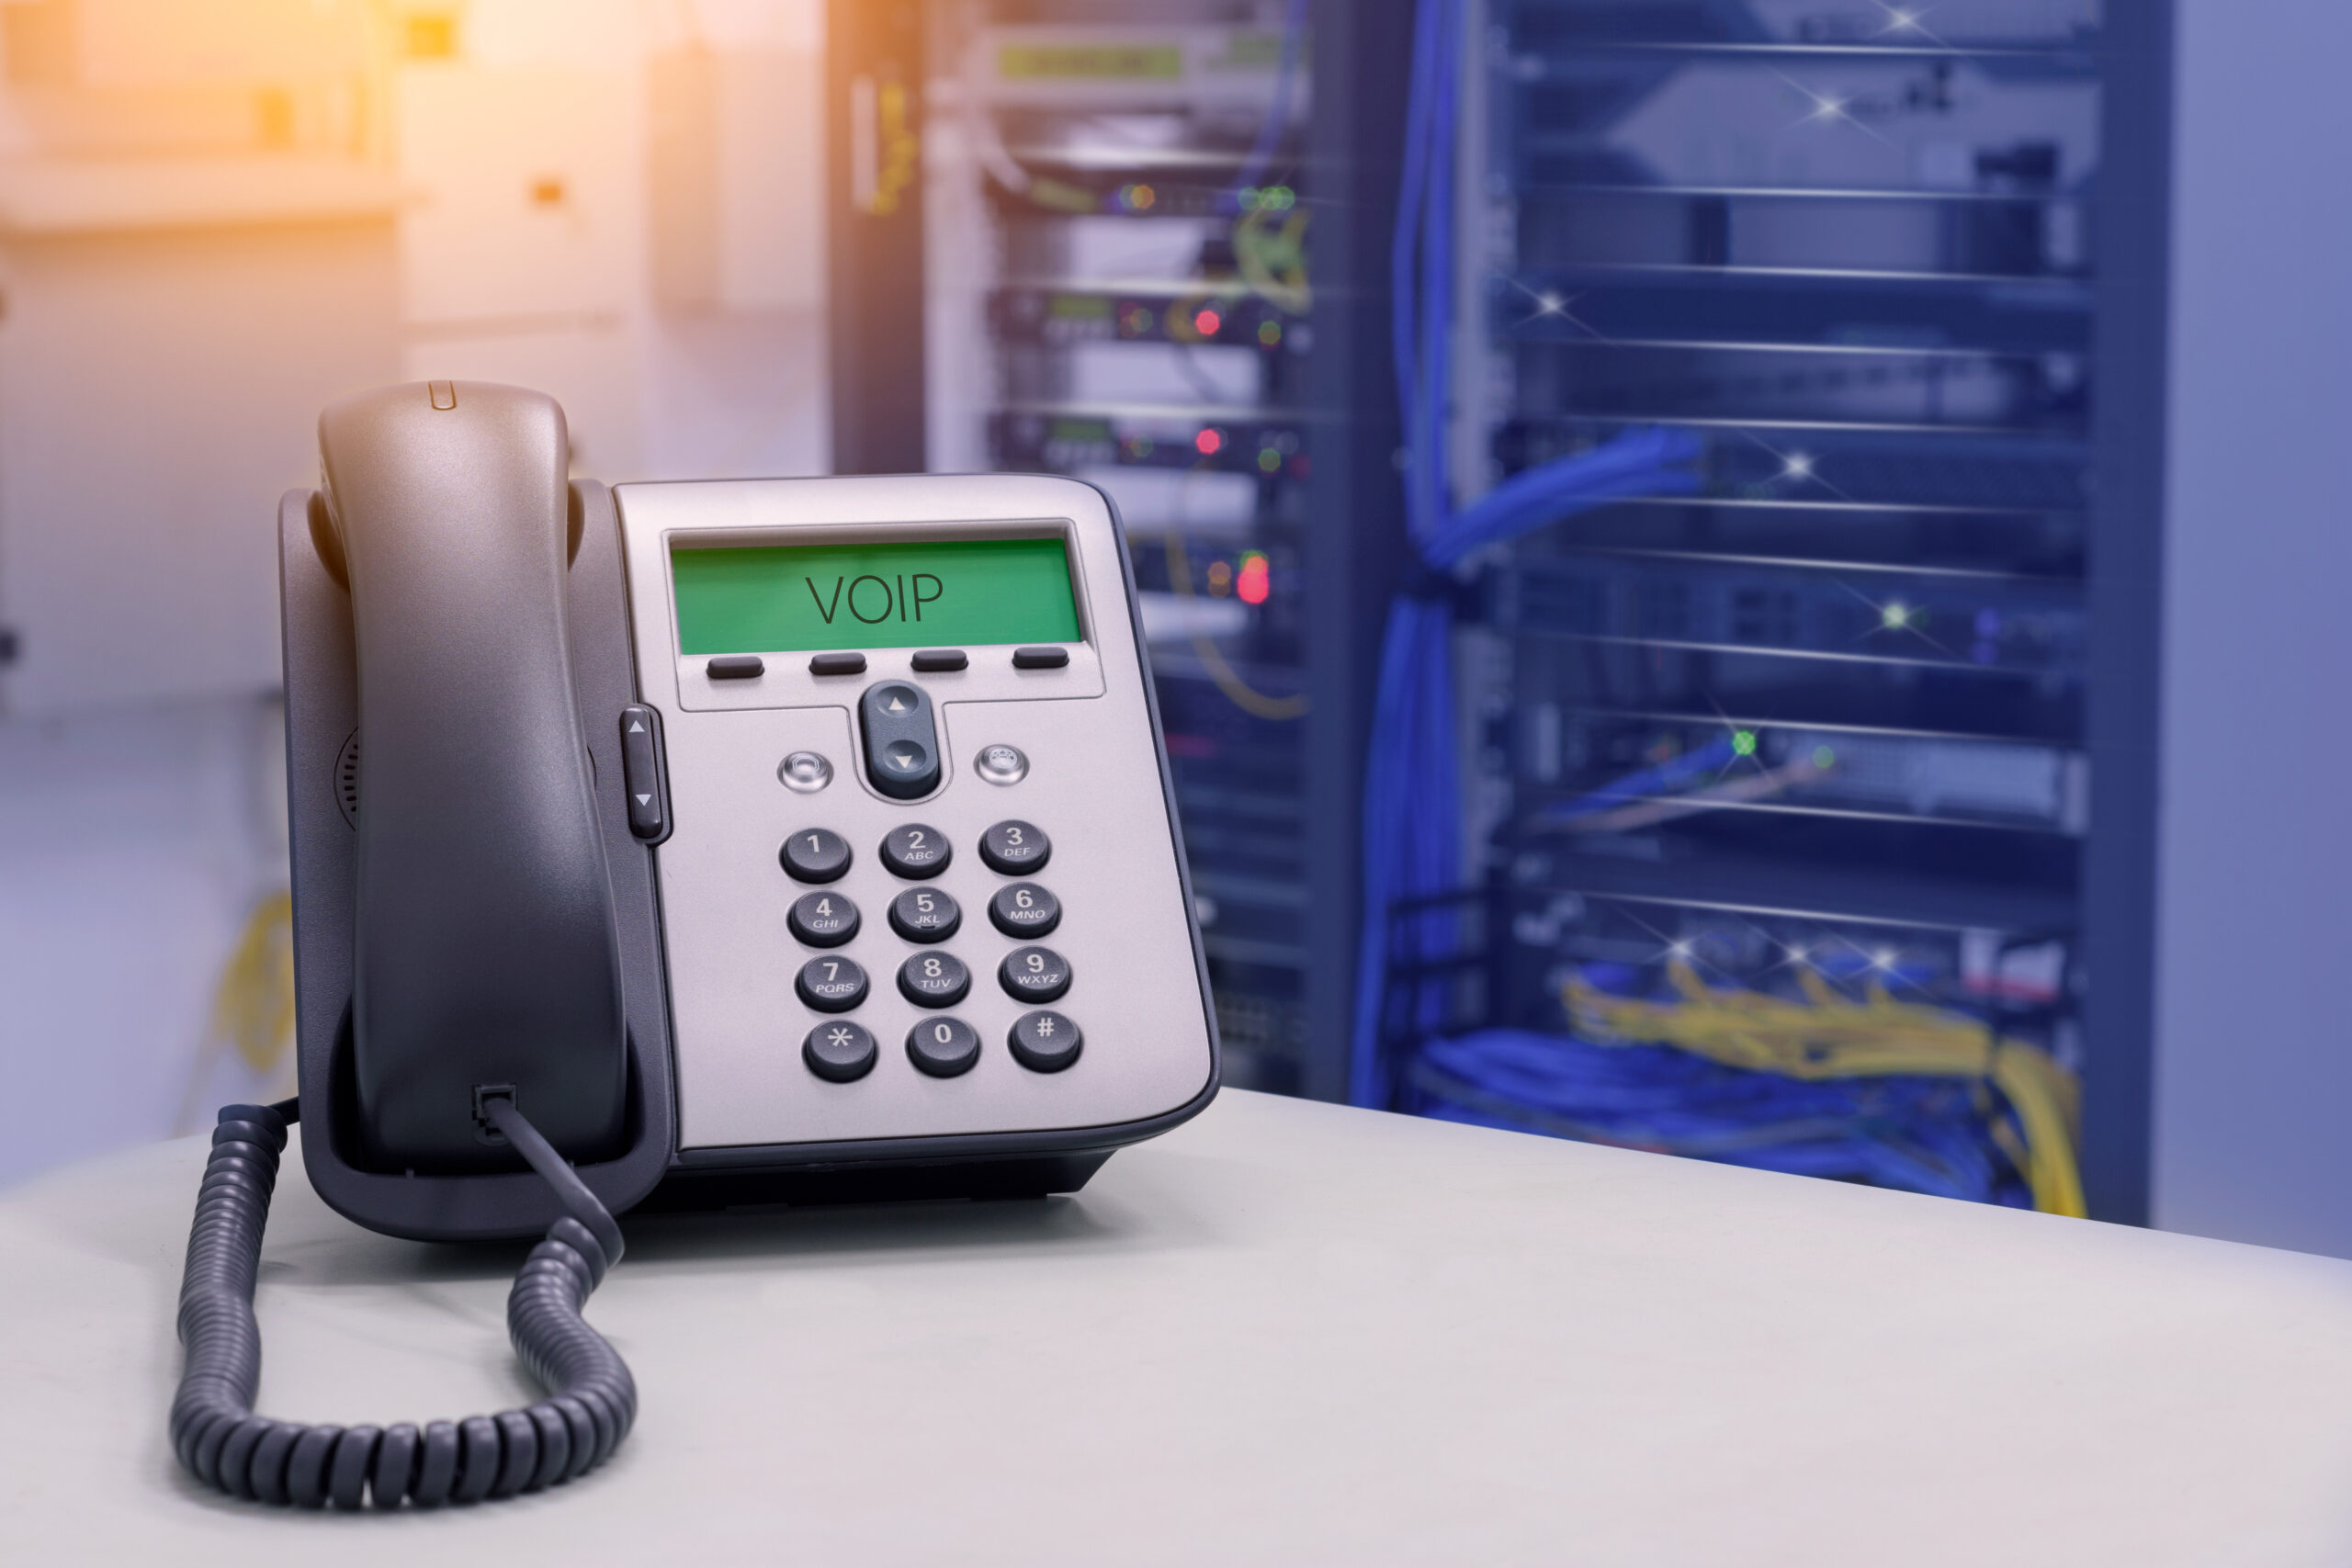 VOIP Phone (IP Phone) in data center room